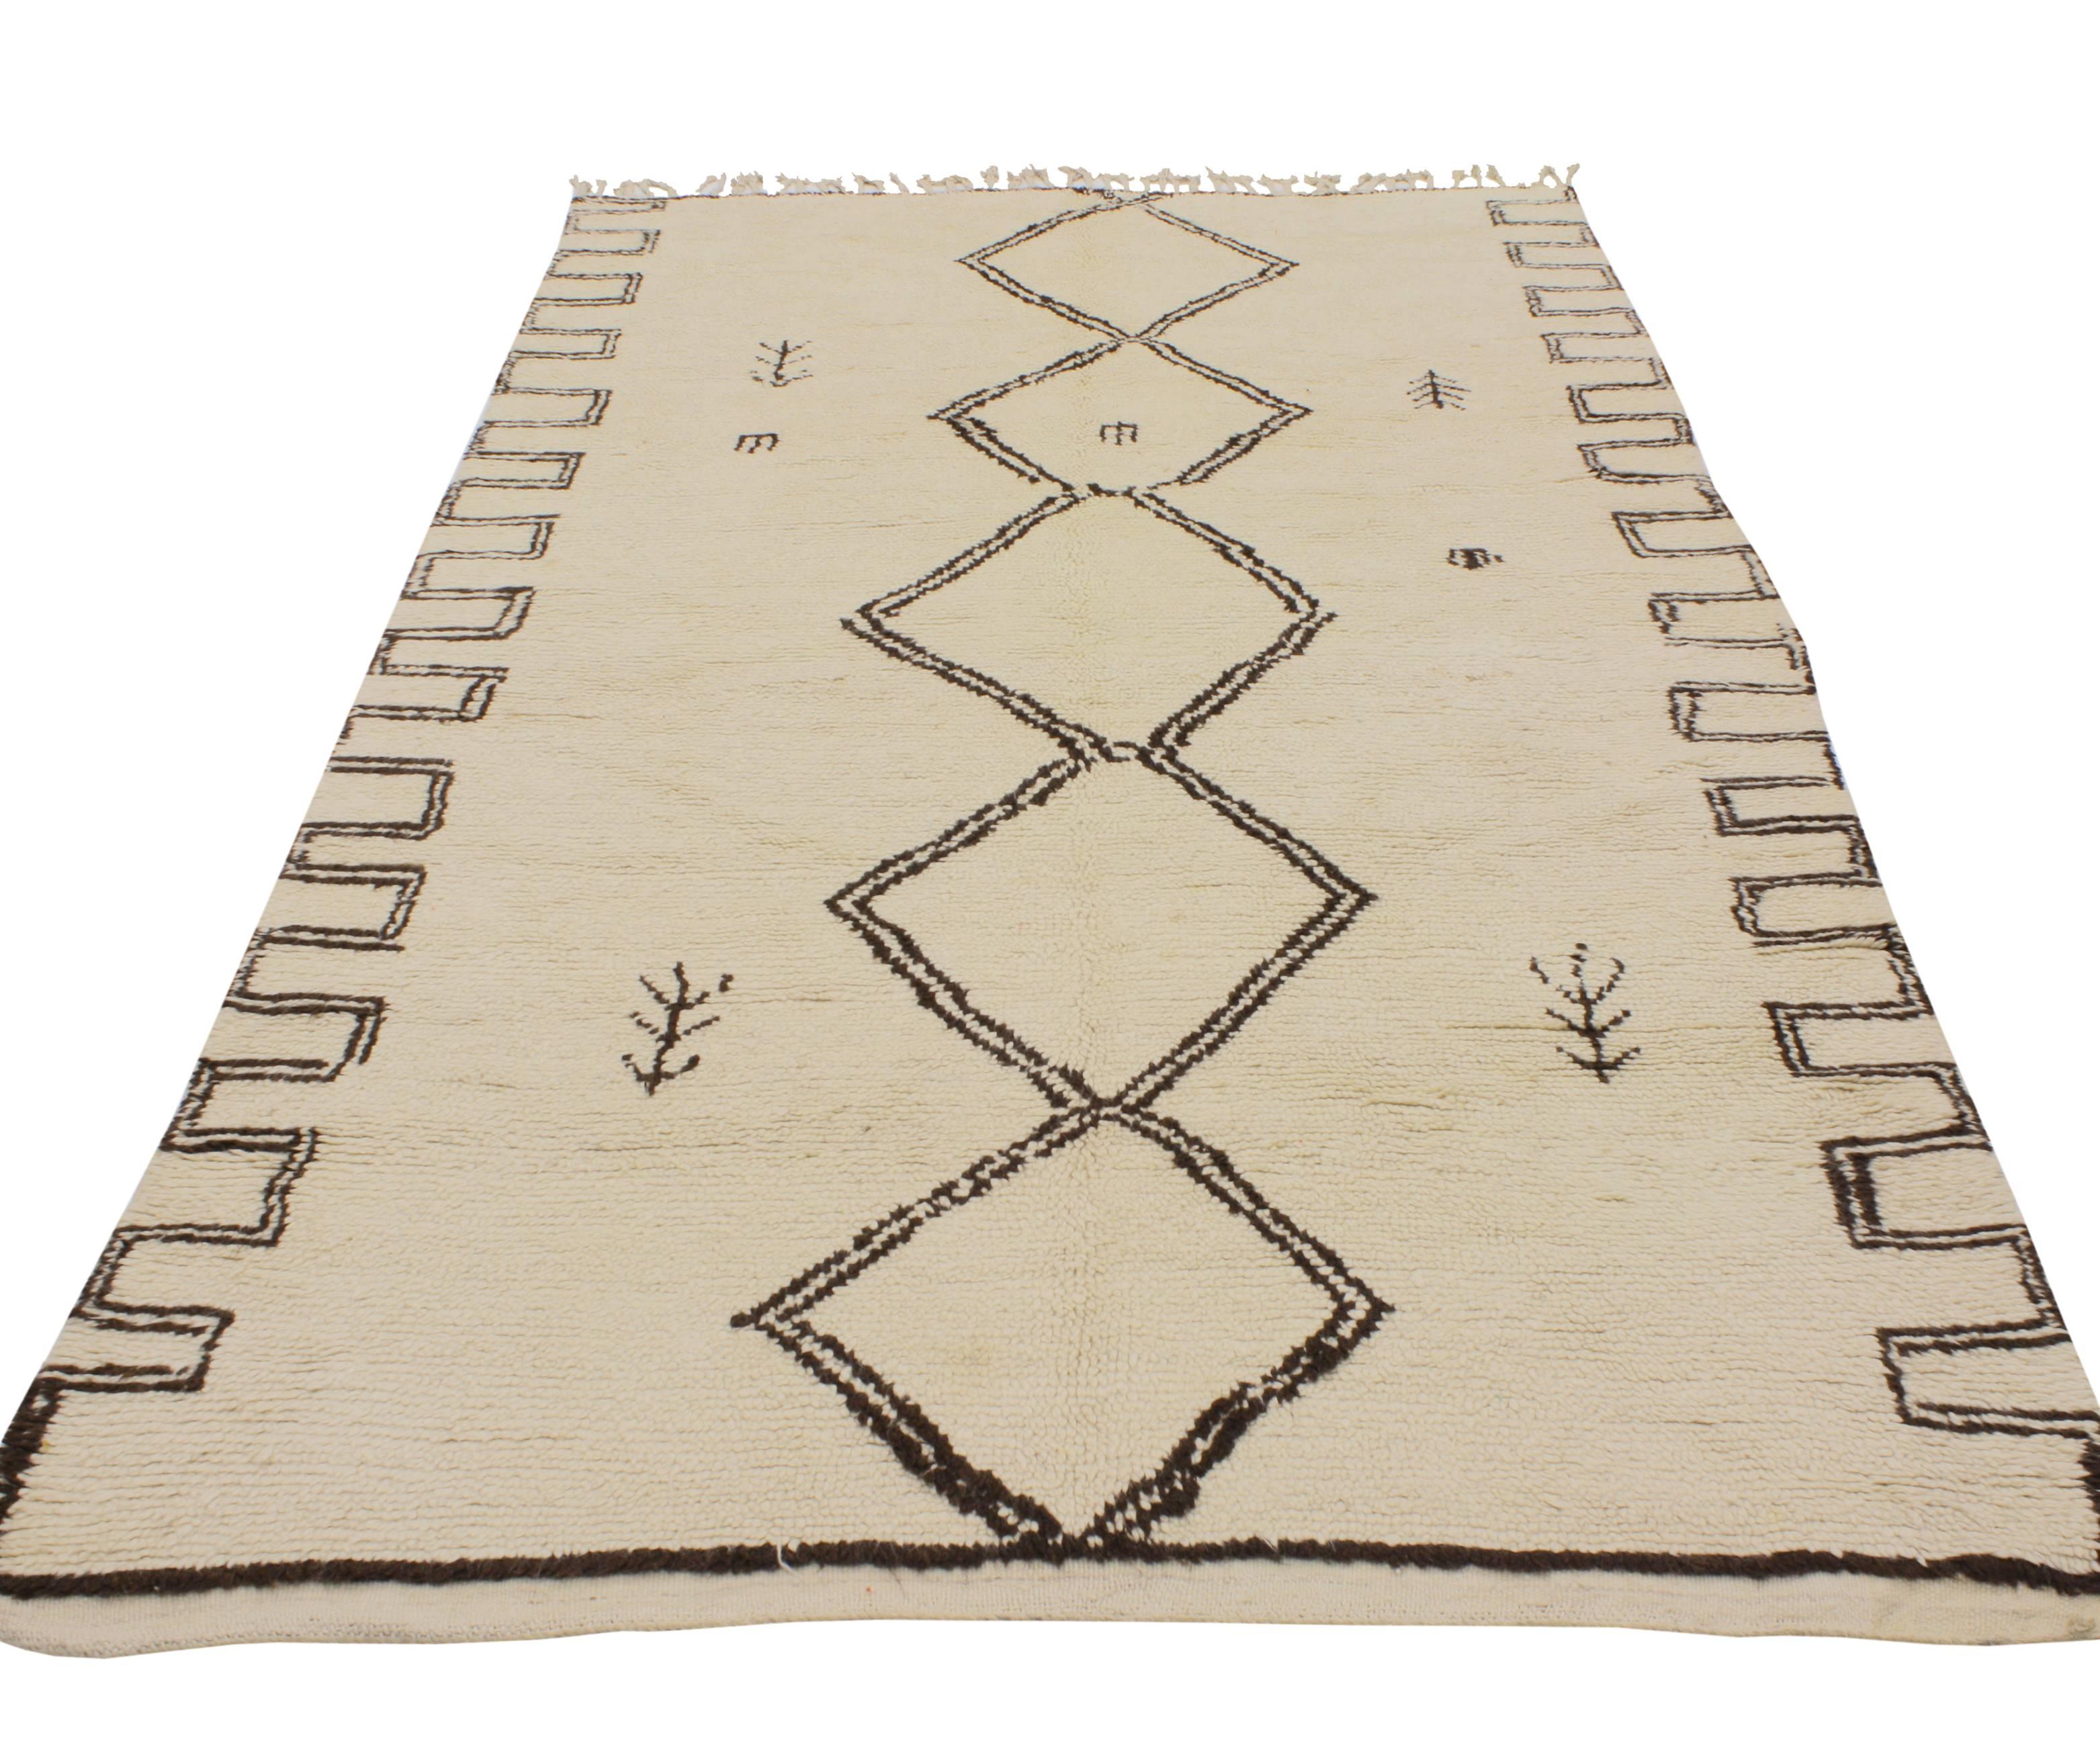 Hand-Knotted Mid-Century Modern Vintage Berber Moroccan Rug with Minimalist Tribal Design